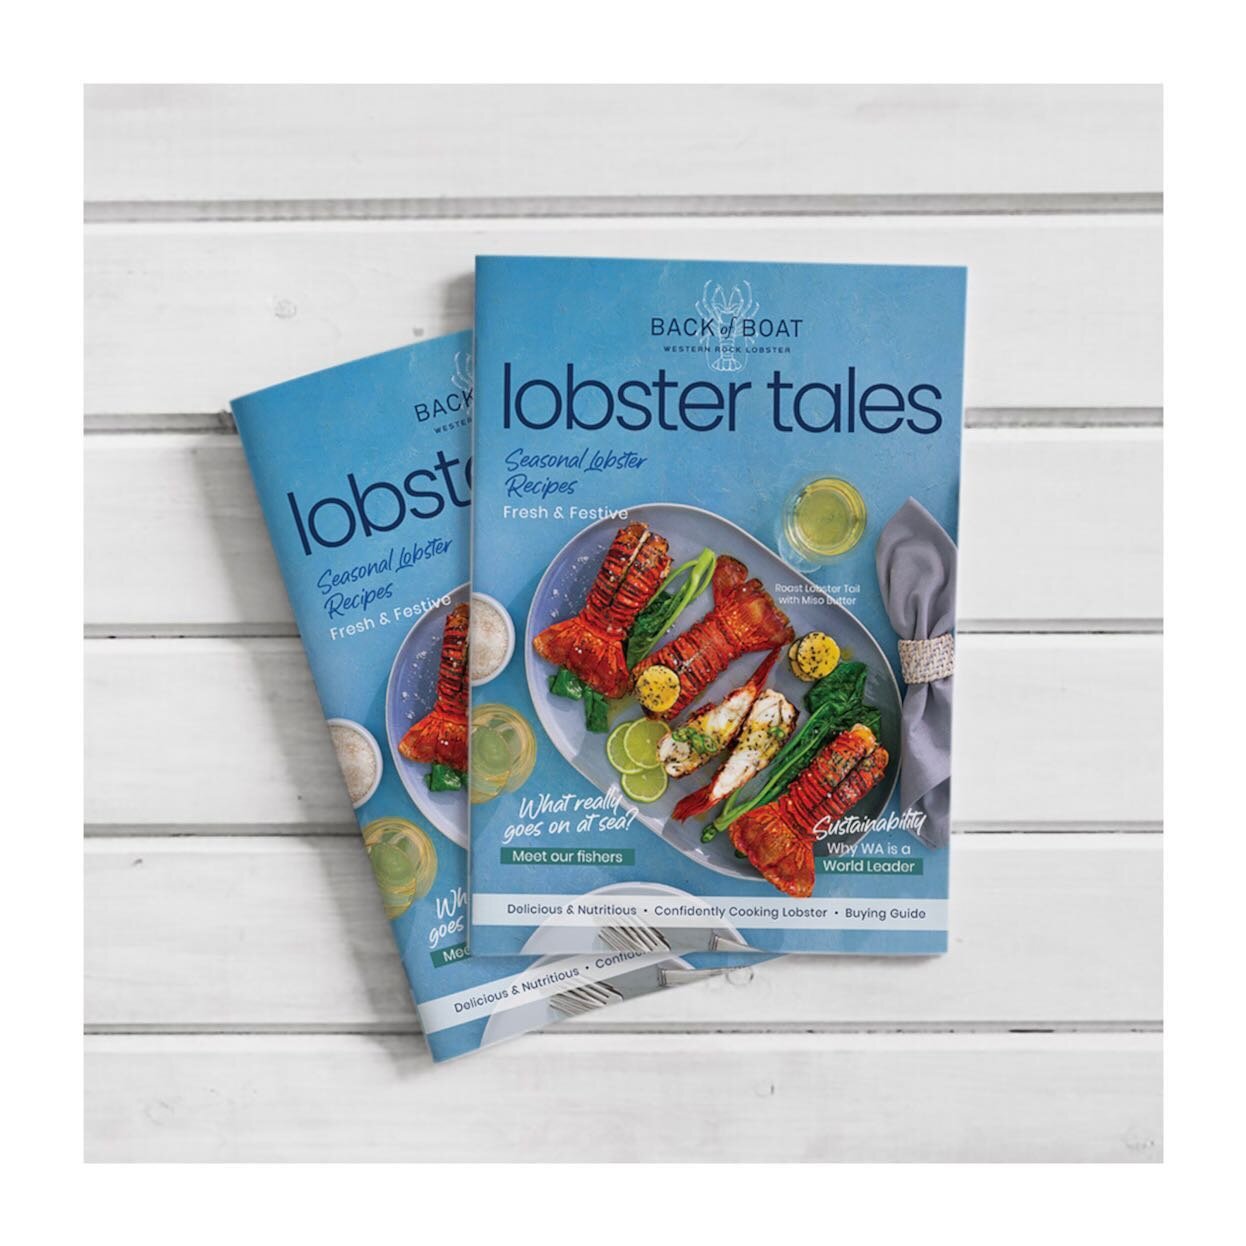 I recently finished collaborating on this delicious and informative magazine &lsquo;lobster tails&rsquo; for @westernrocklobster. Working alongside creative director, food stylist and recipe developer @kateflowerfood and editor @kellydavis53 on the m